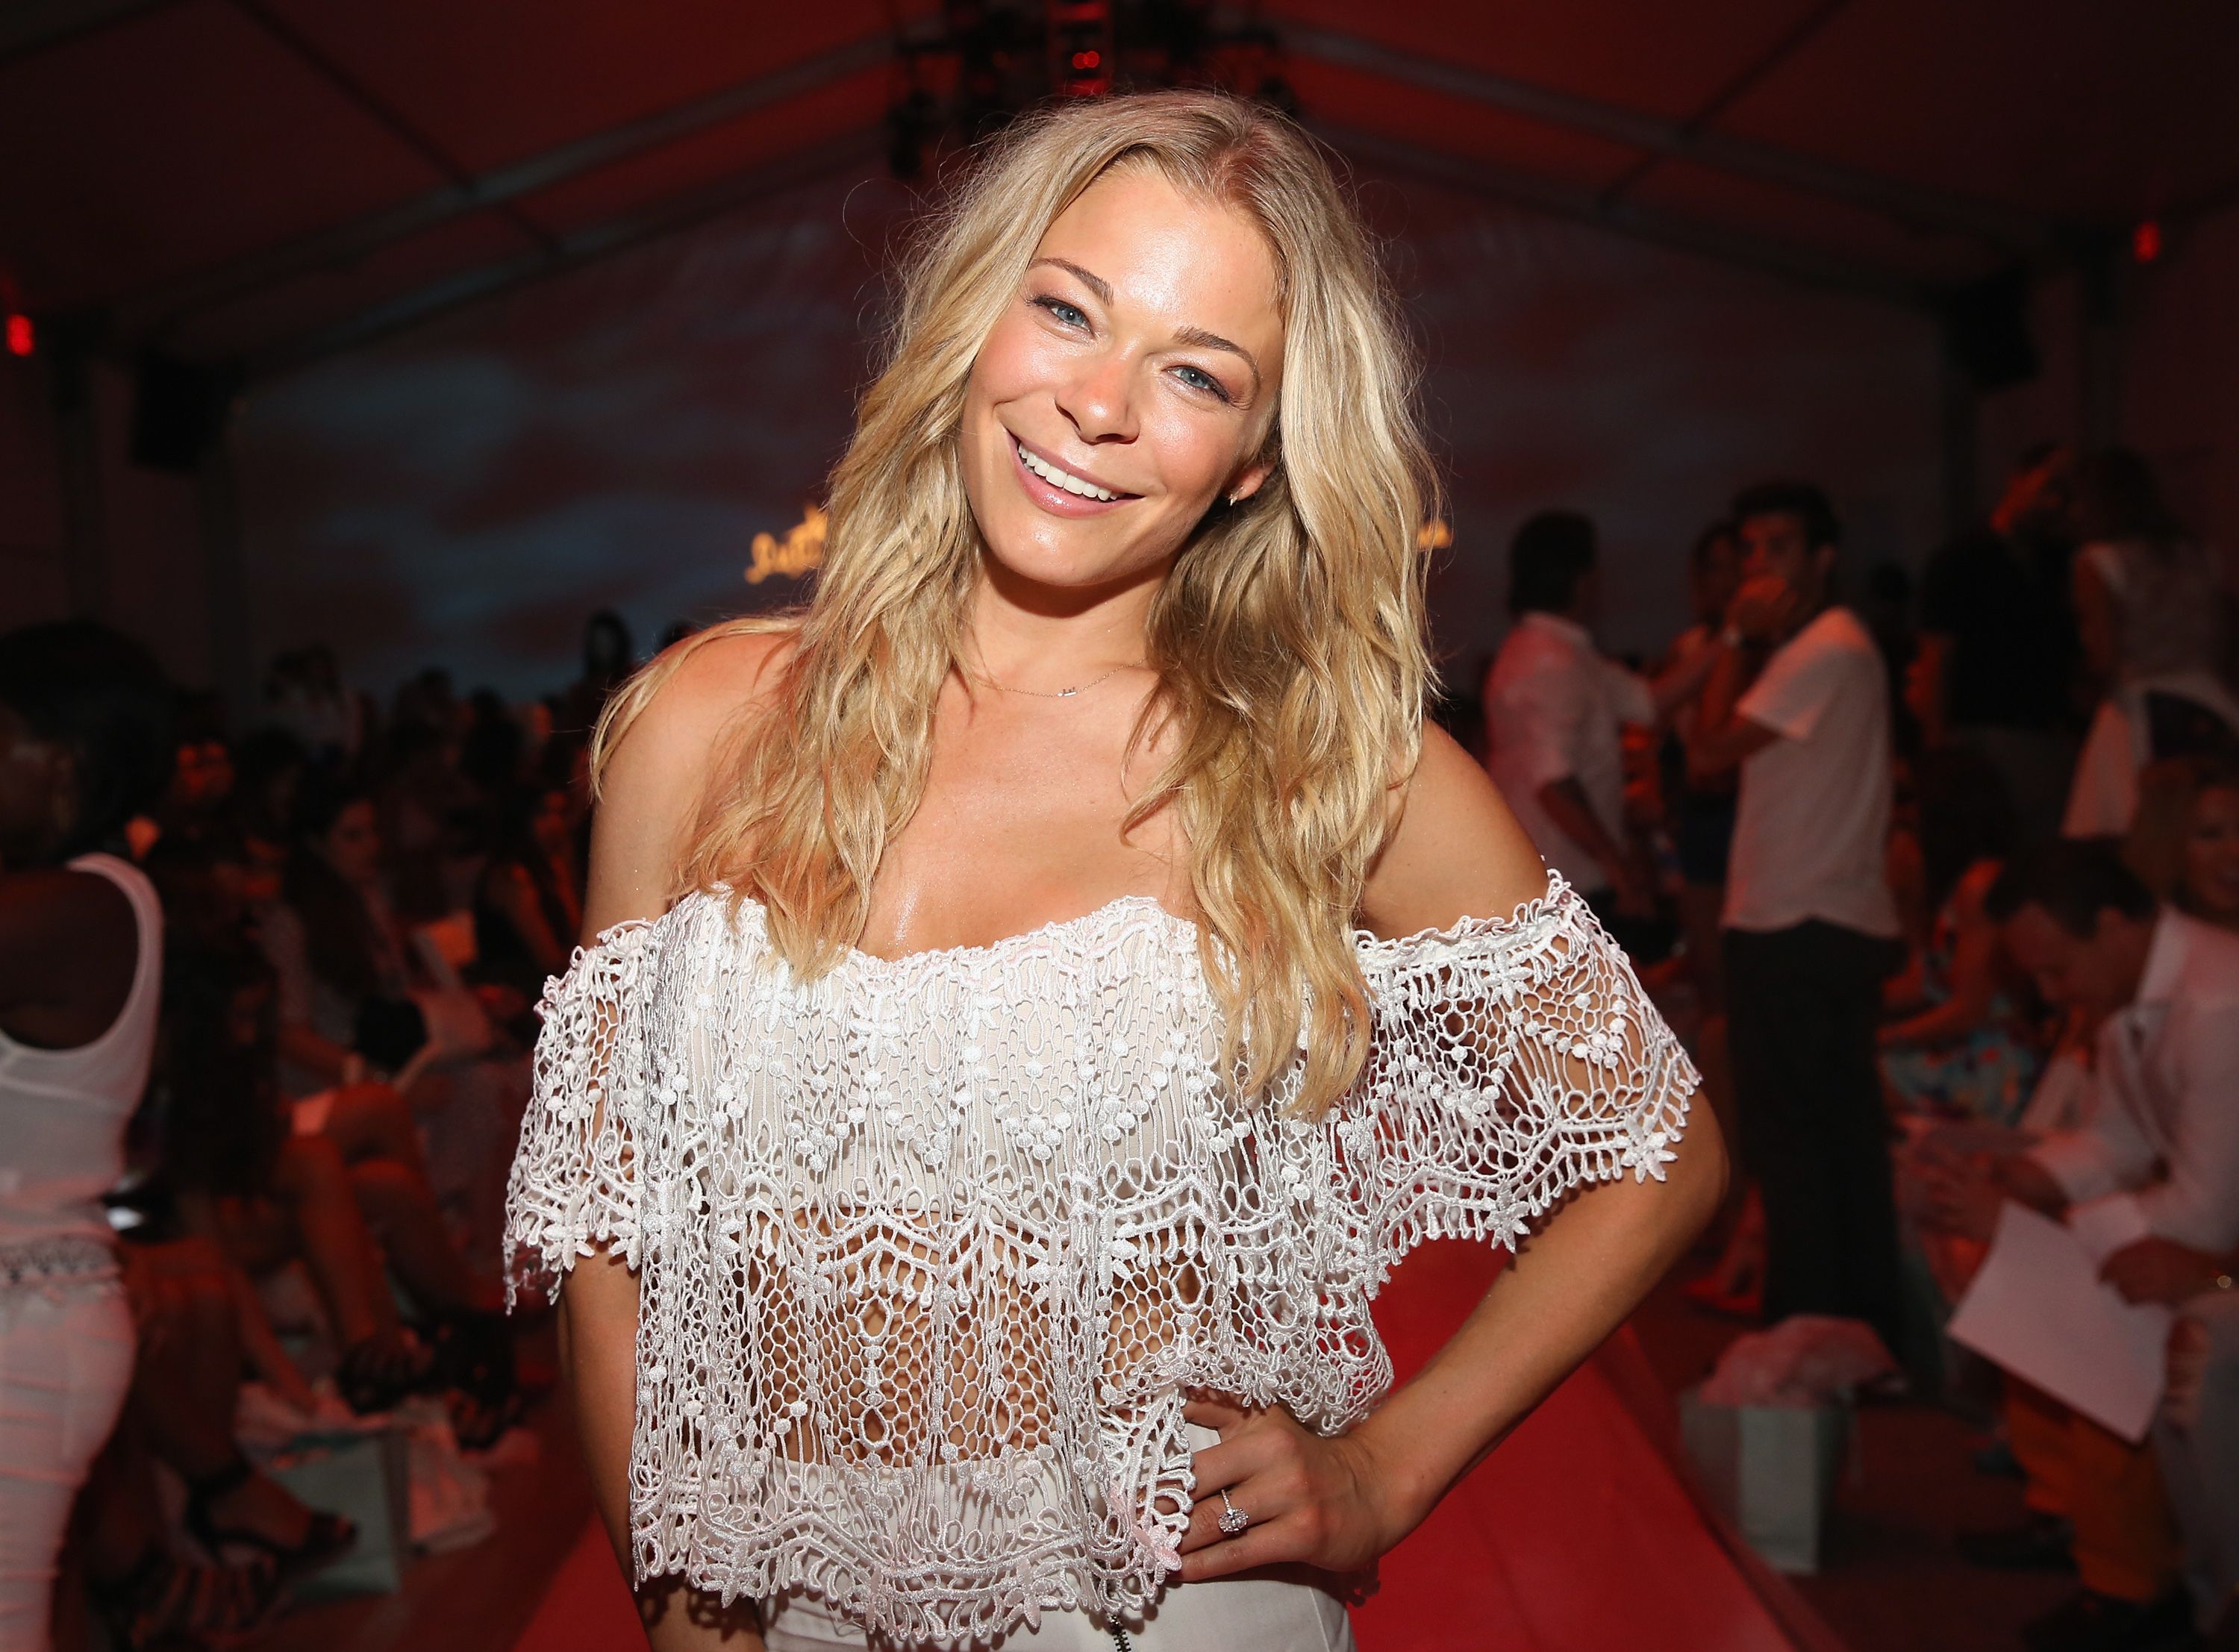 LeAnn Rimes Has Sculpted Abs, Legs In A Bikini In IG Music Video picture picture